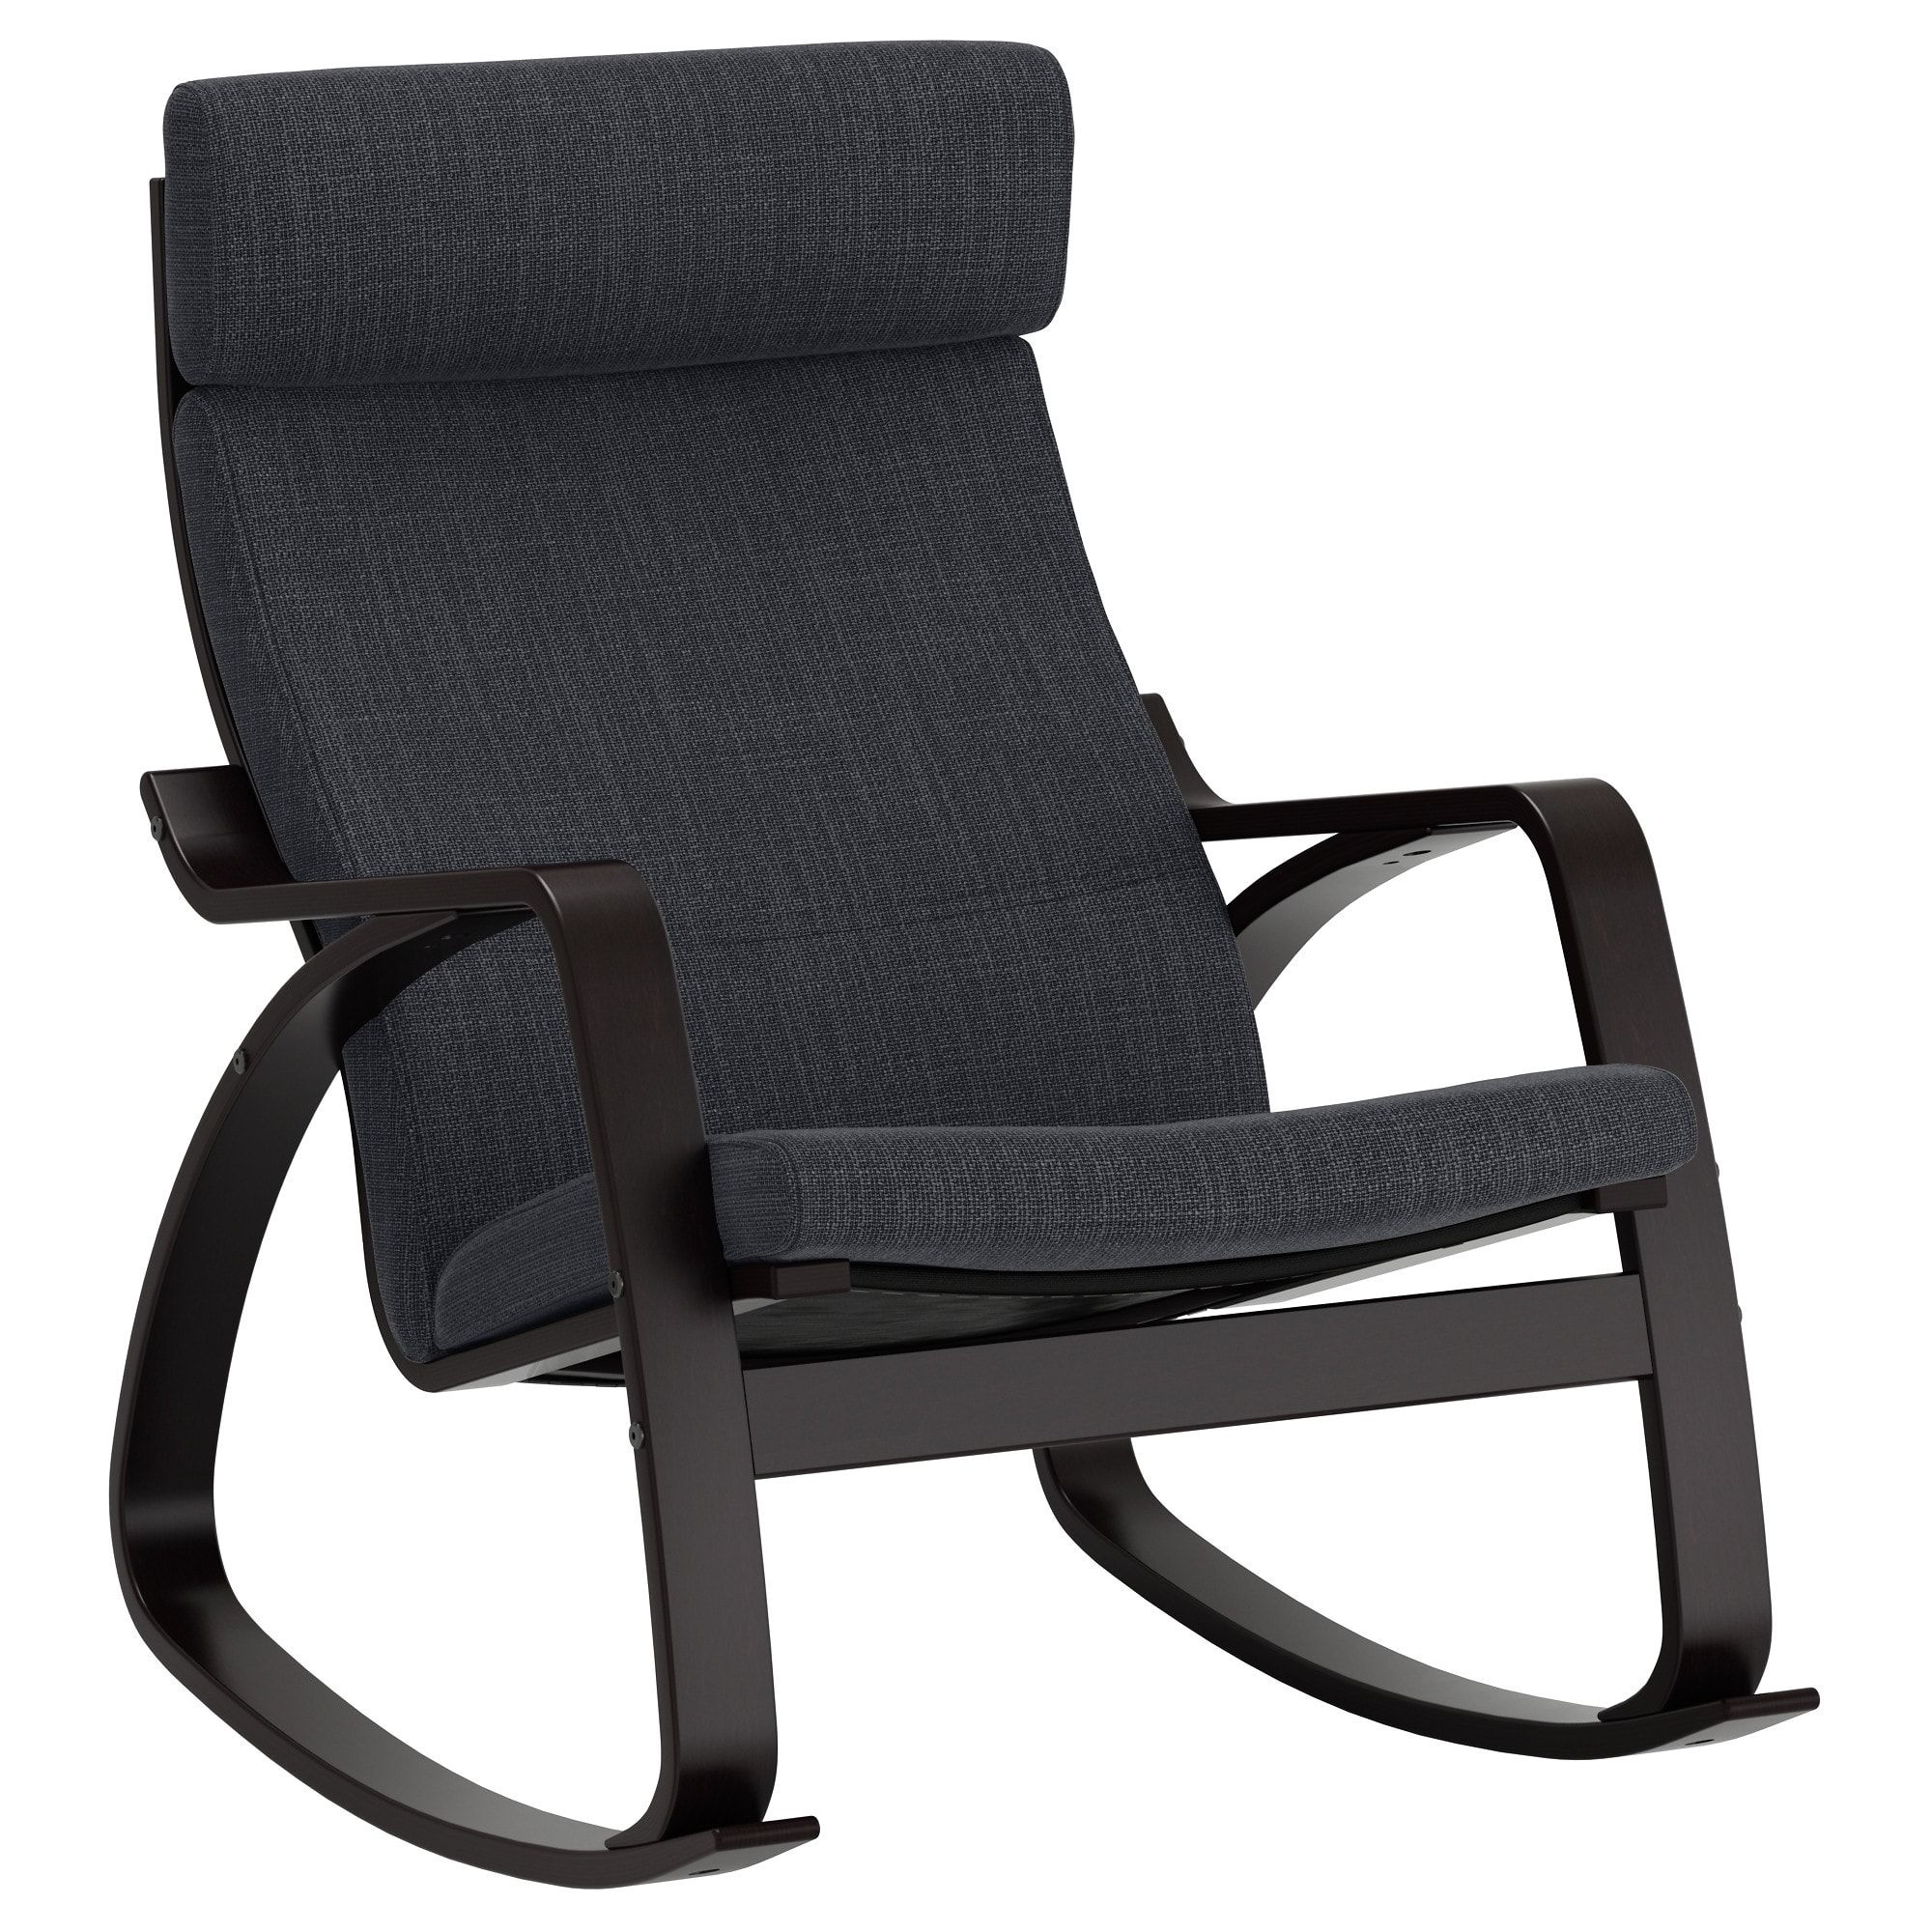 Ikea Rocking Chairs With Regard To Most Popular Poäng Rocking Chair Black Brown/hillared Anthracite – Ikea (View 10 of 15)